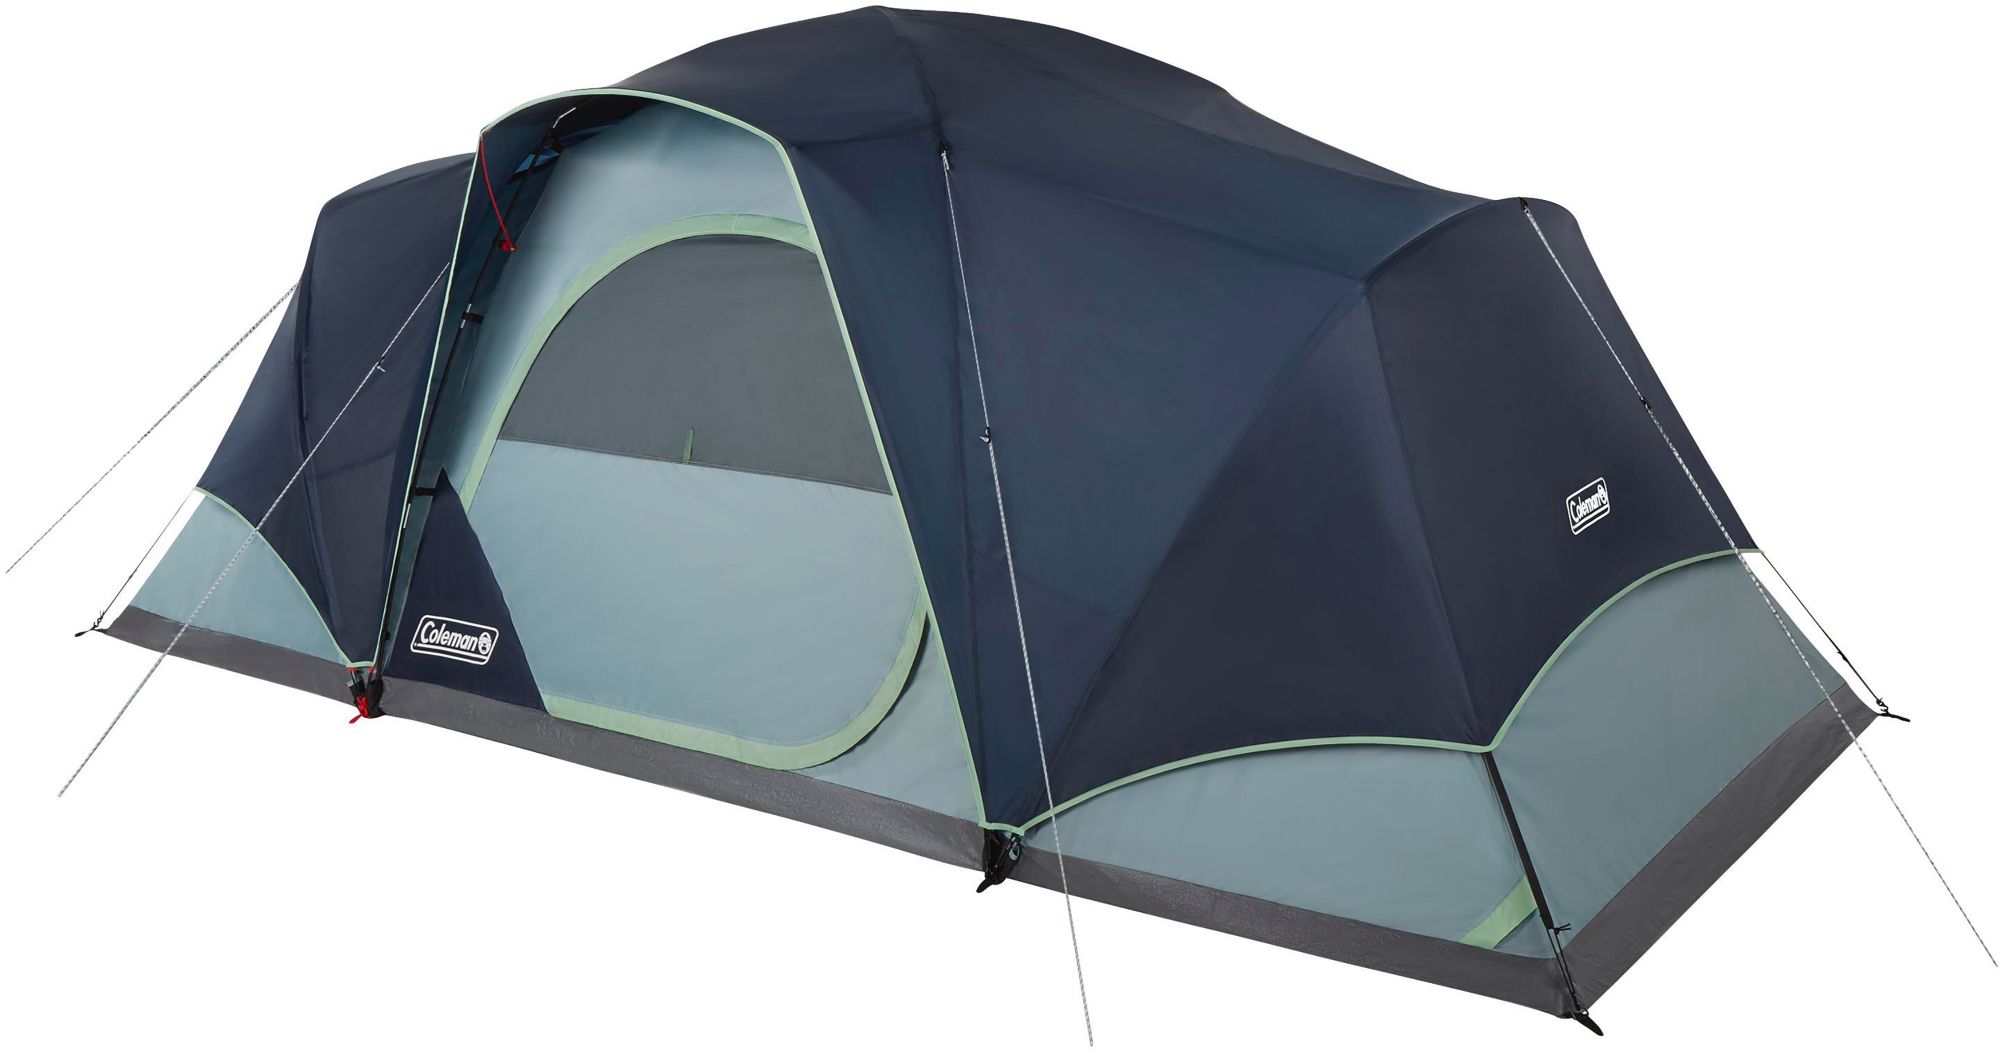 Photos - Tent Coleman Skydome 8-Person Camping  XL, Blue 21COLUSKYDMTNT8PXCAT 